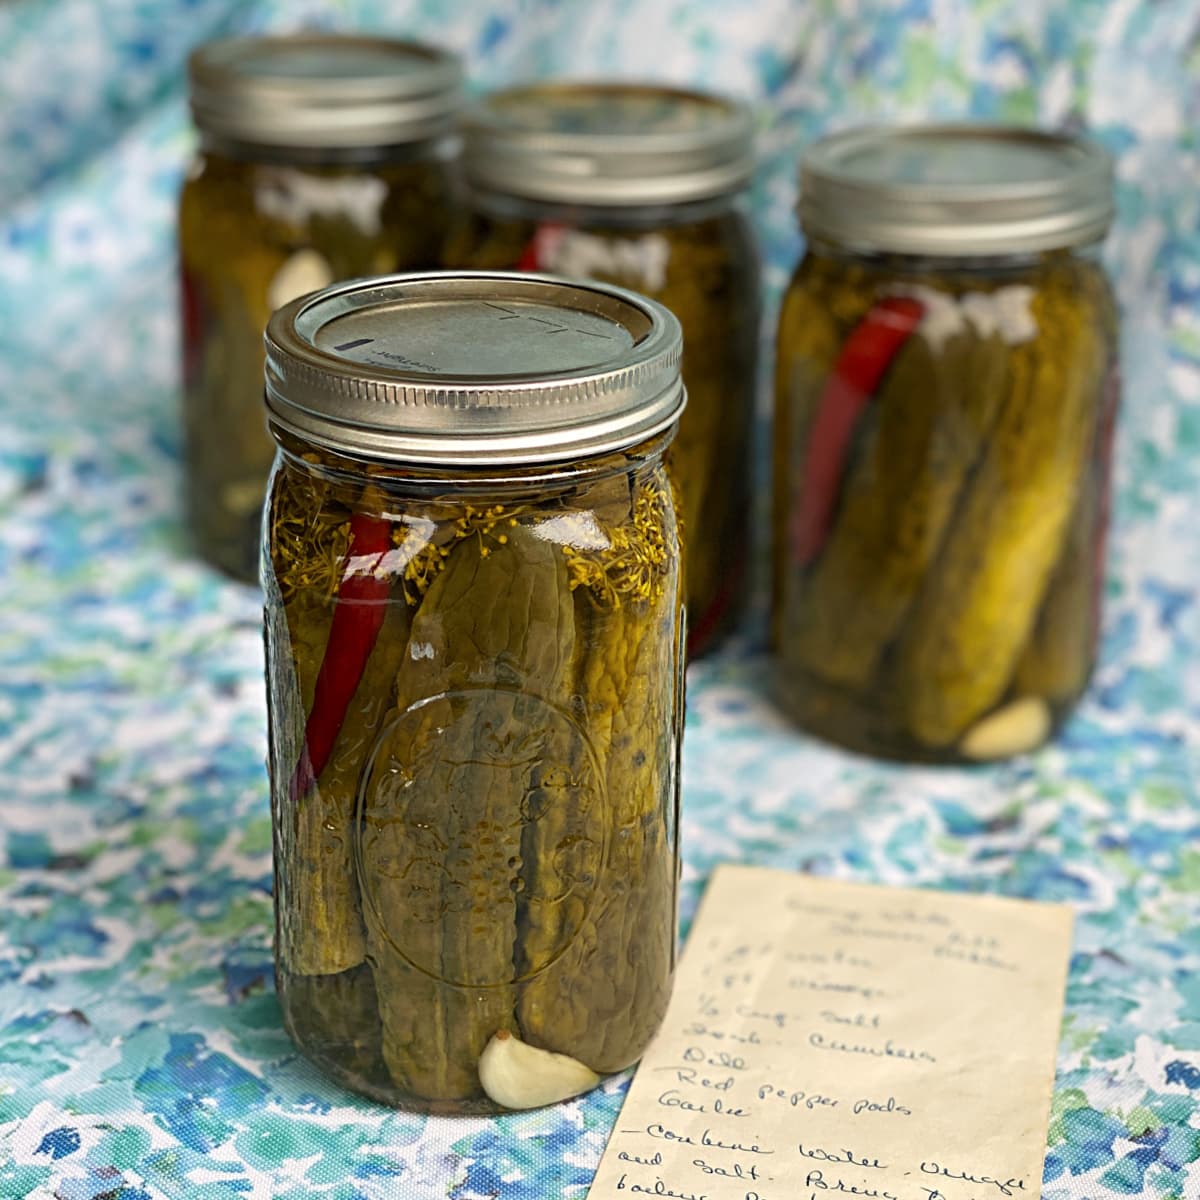 Pop’s Spicy Garlic Dill Pickles